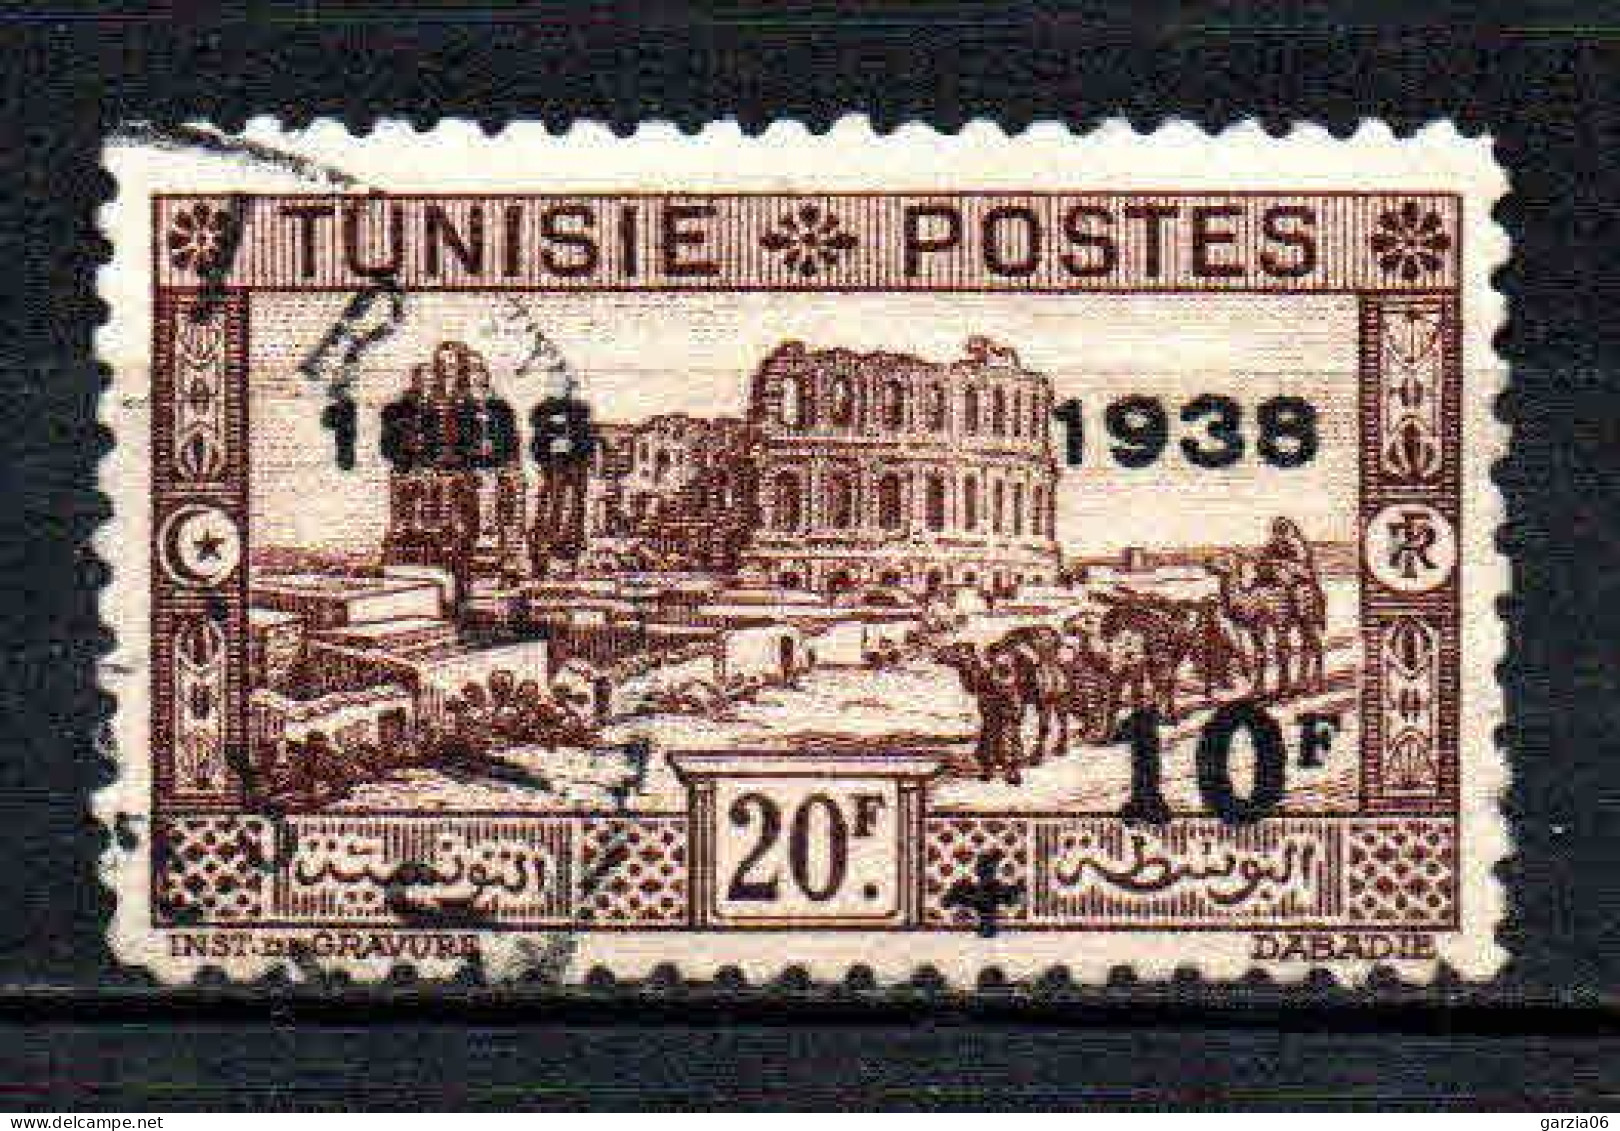 Tunisie  - 1938 - Type Antérieurs Surch  - N° 204  - Oblit - Used - Used Stamps